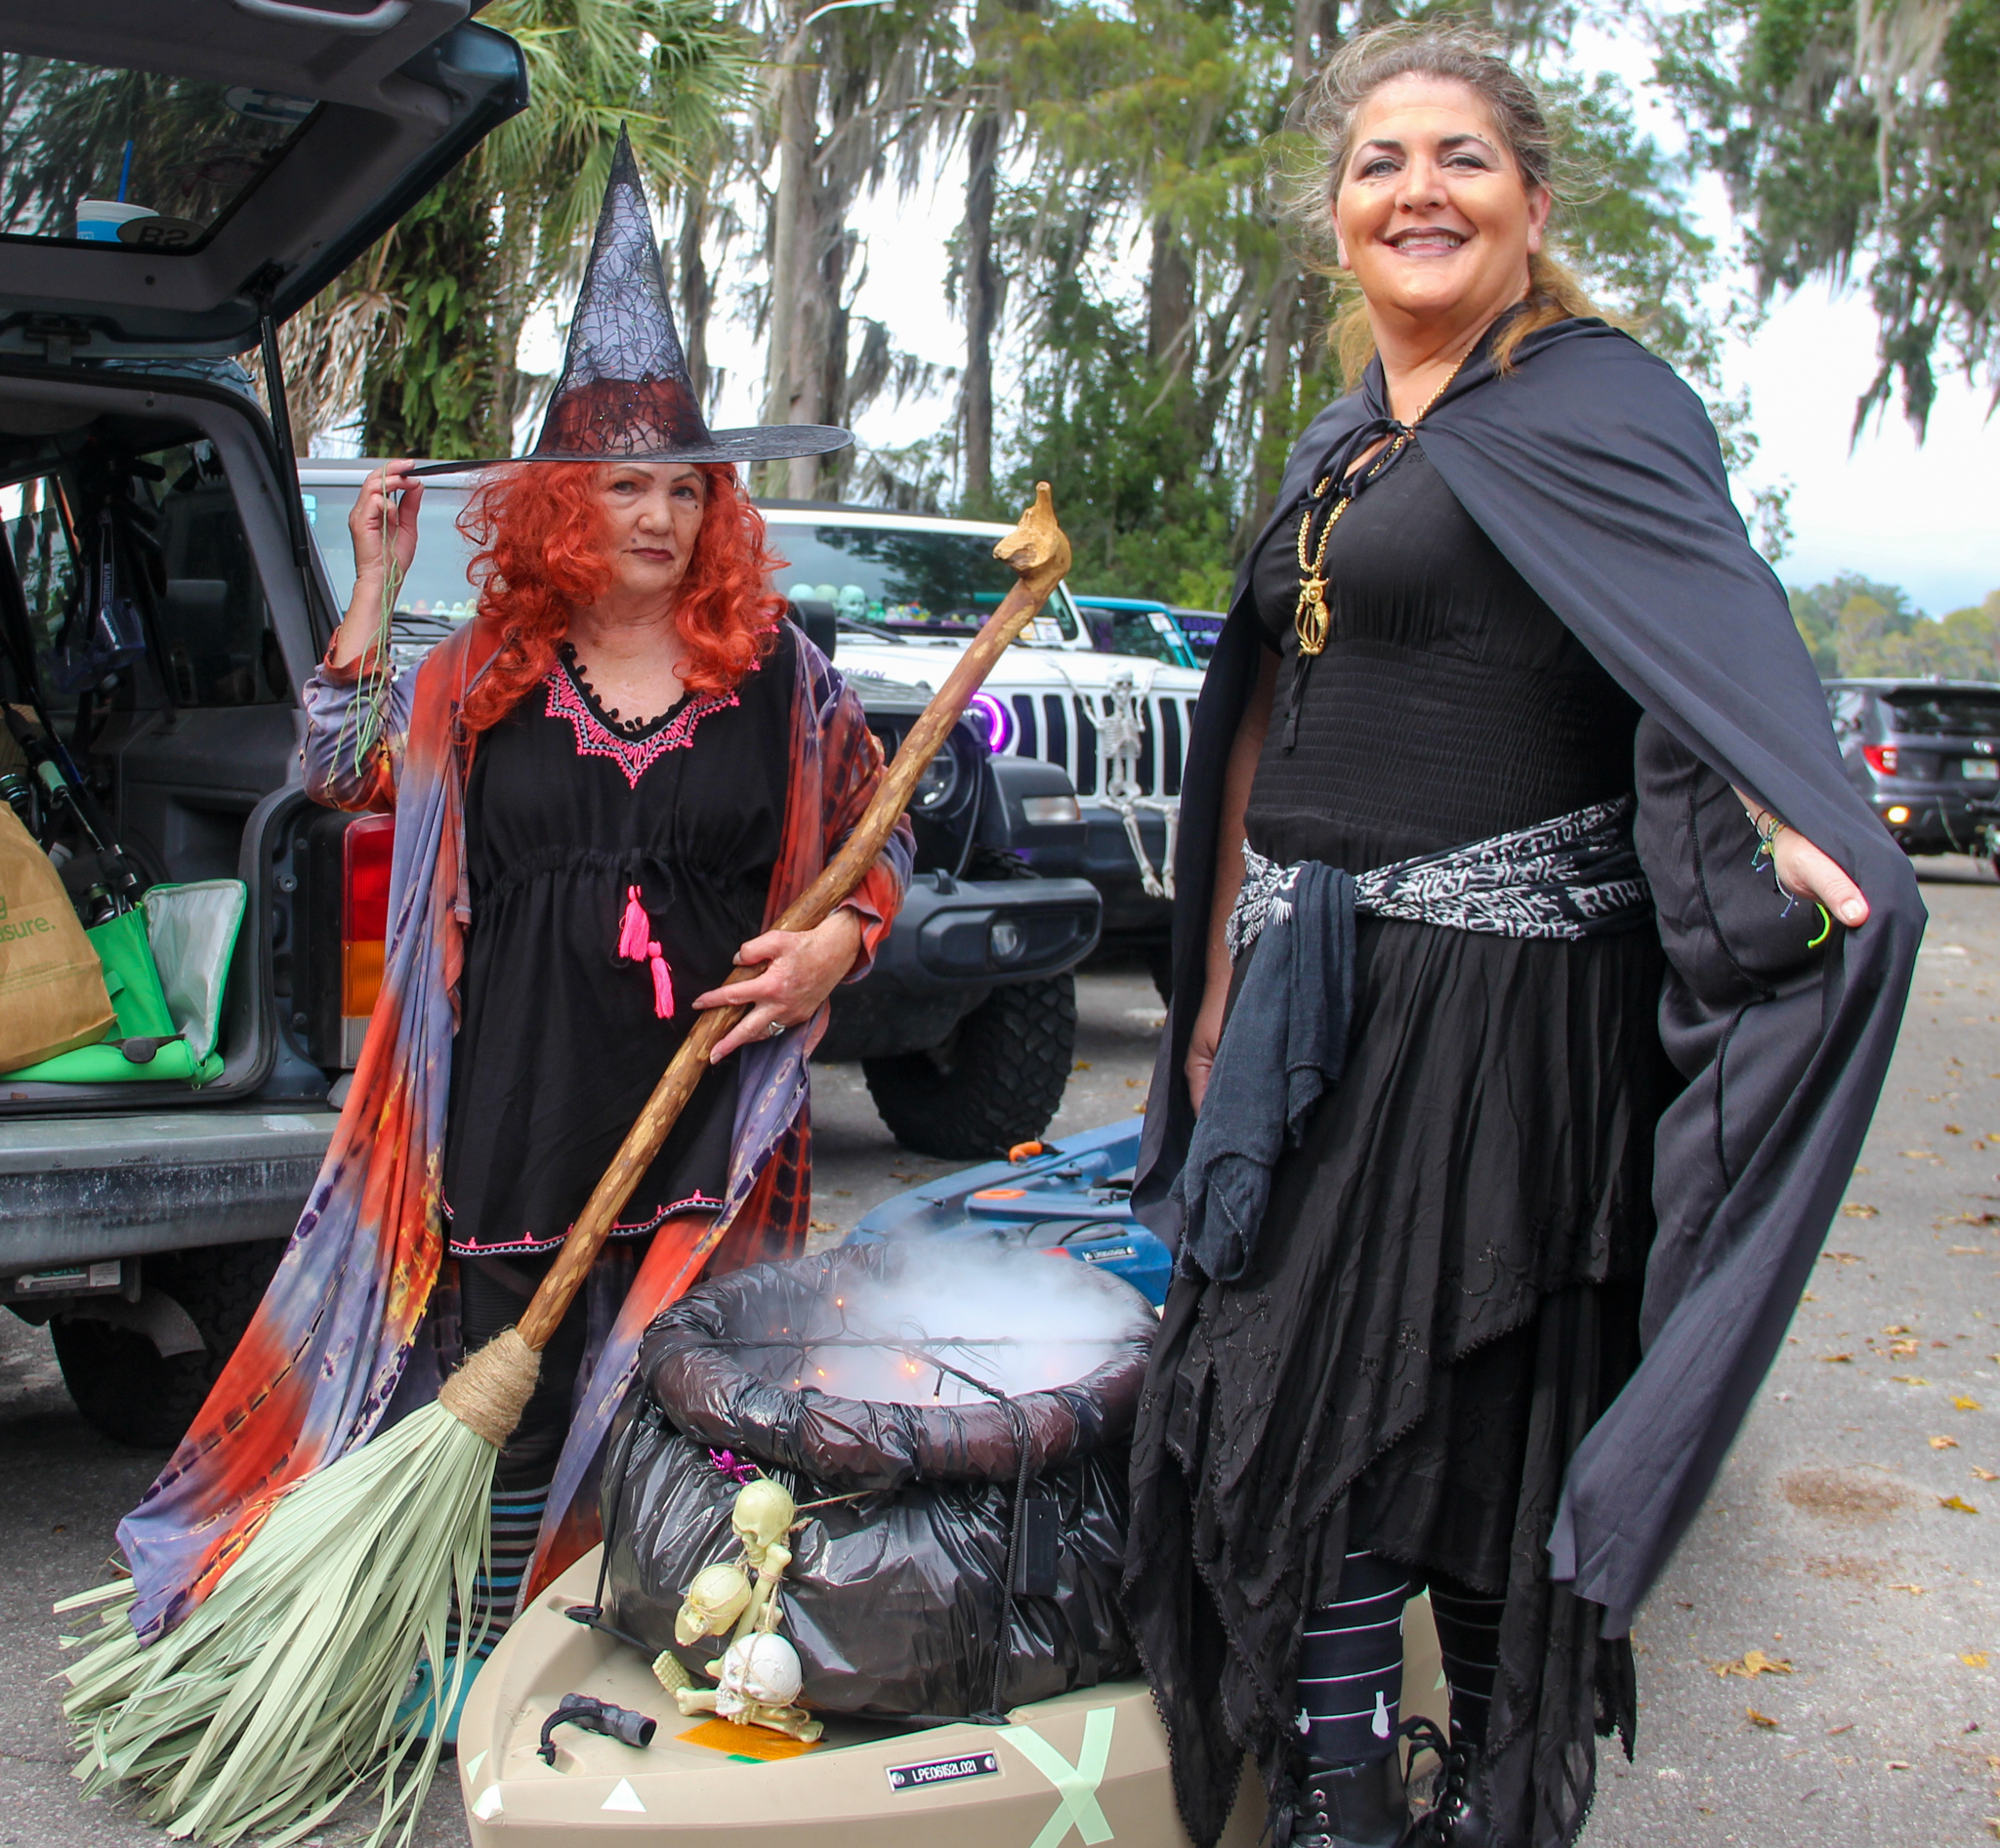 alatka woman Emma Shaw (left) stands next to St. Augustine woman Kiersten Hoey as they load up their cauldron with dry ice and prepare to kayak in the 2022 Melrose Bay Witches Paddle.